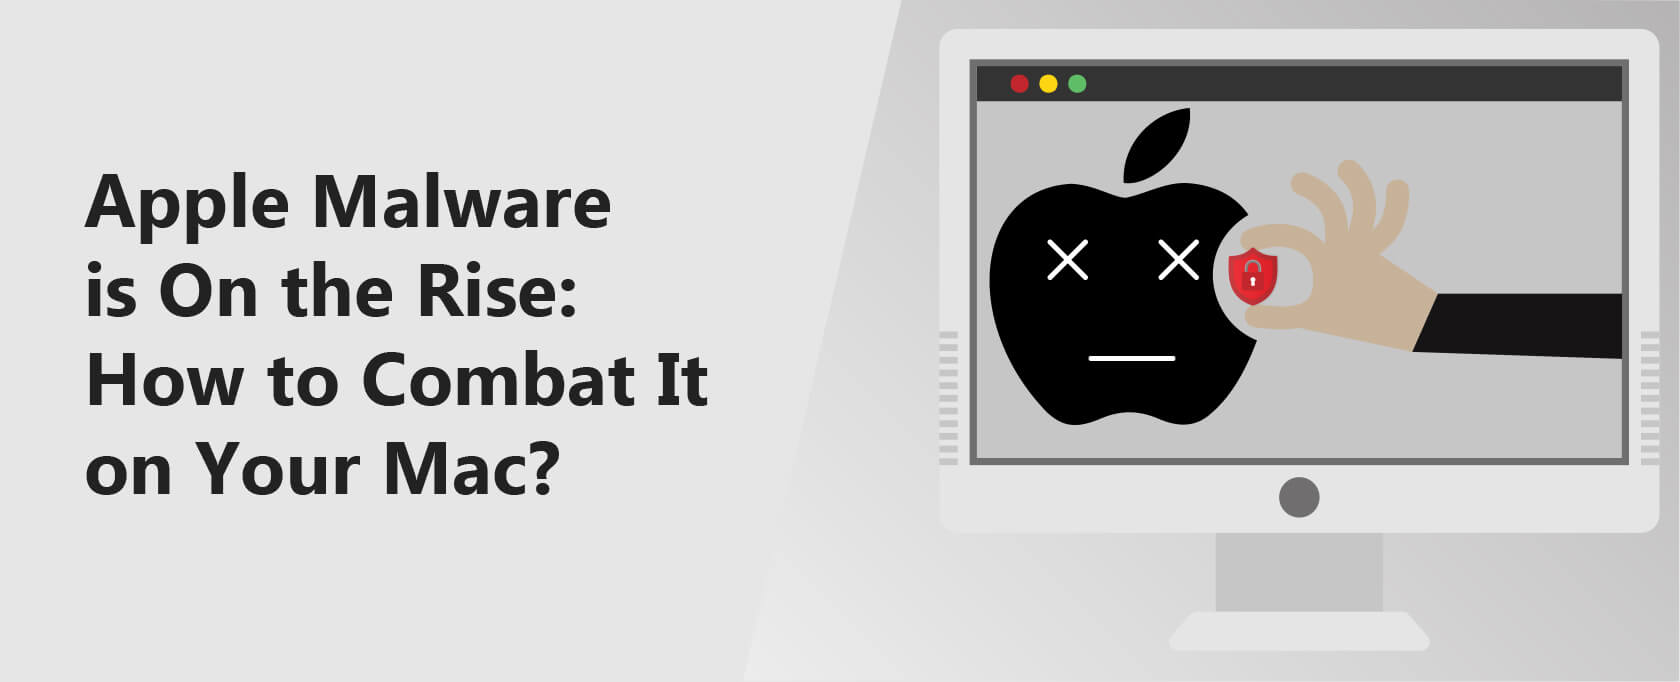 Apple Malware is On the Rise: How to Combat It on Your Mac?